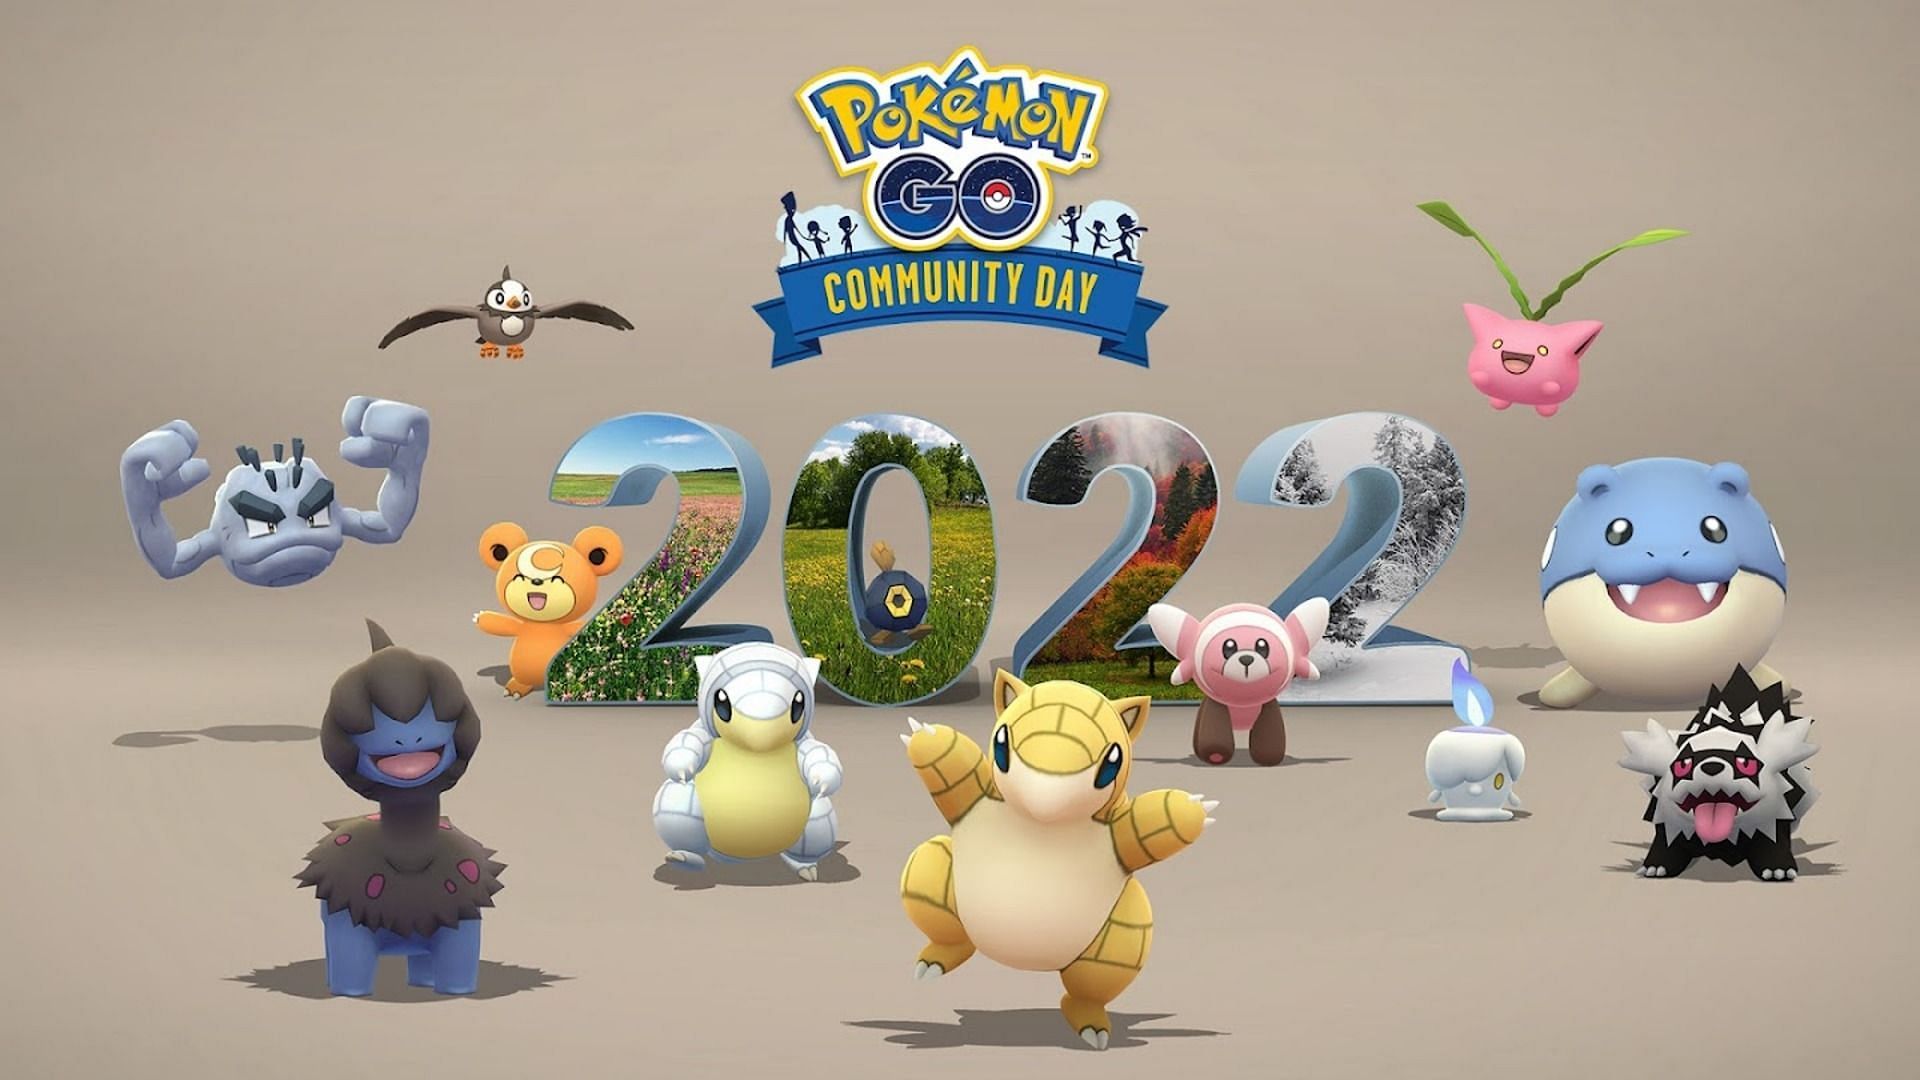 Official artwork for the last Community Day event of 2022 for Pokemon GO (Image via Niantic)